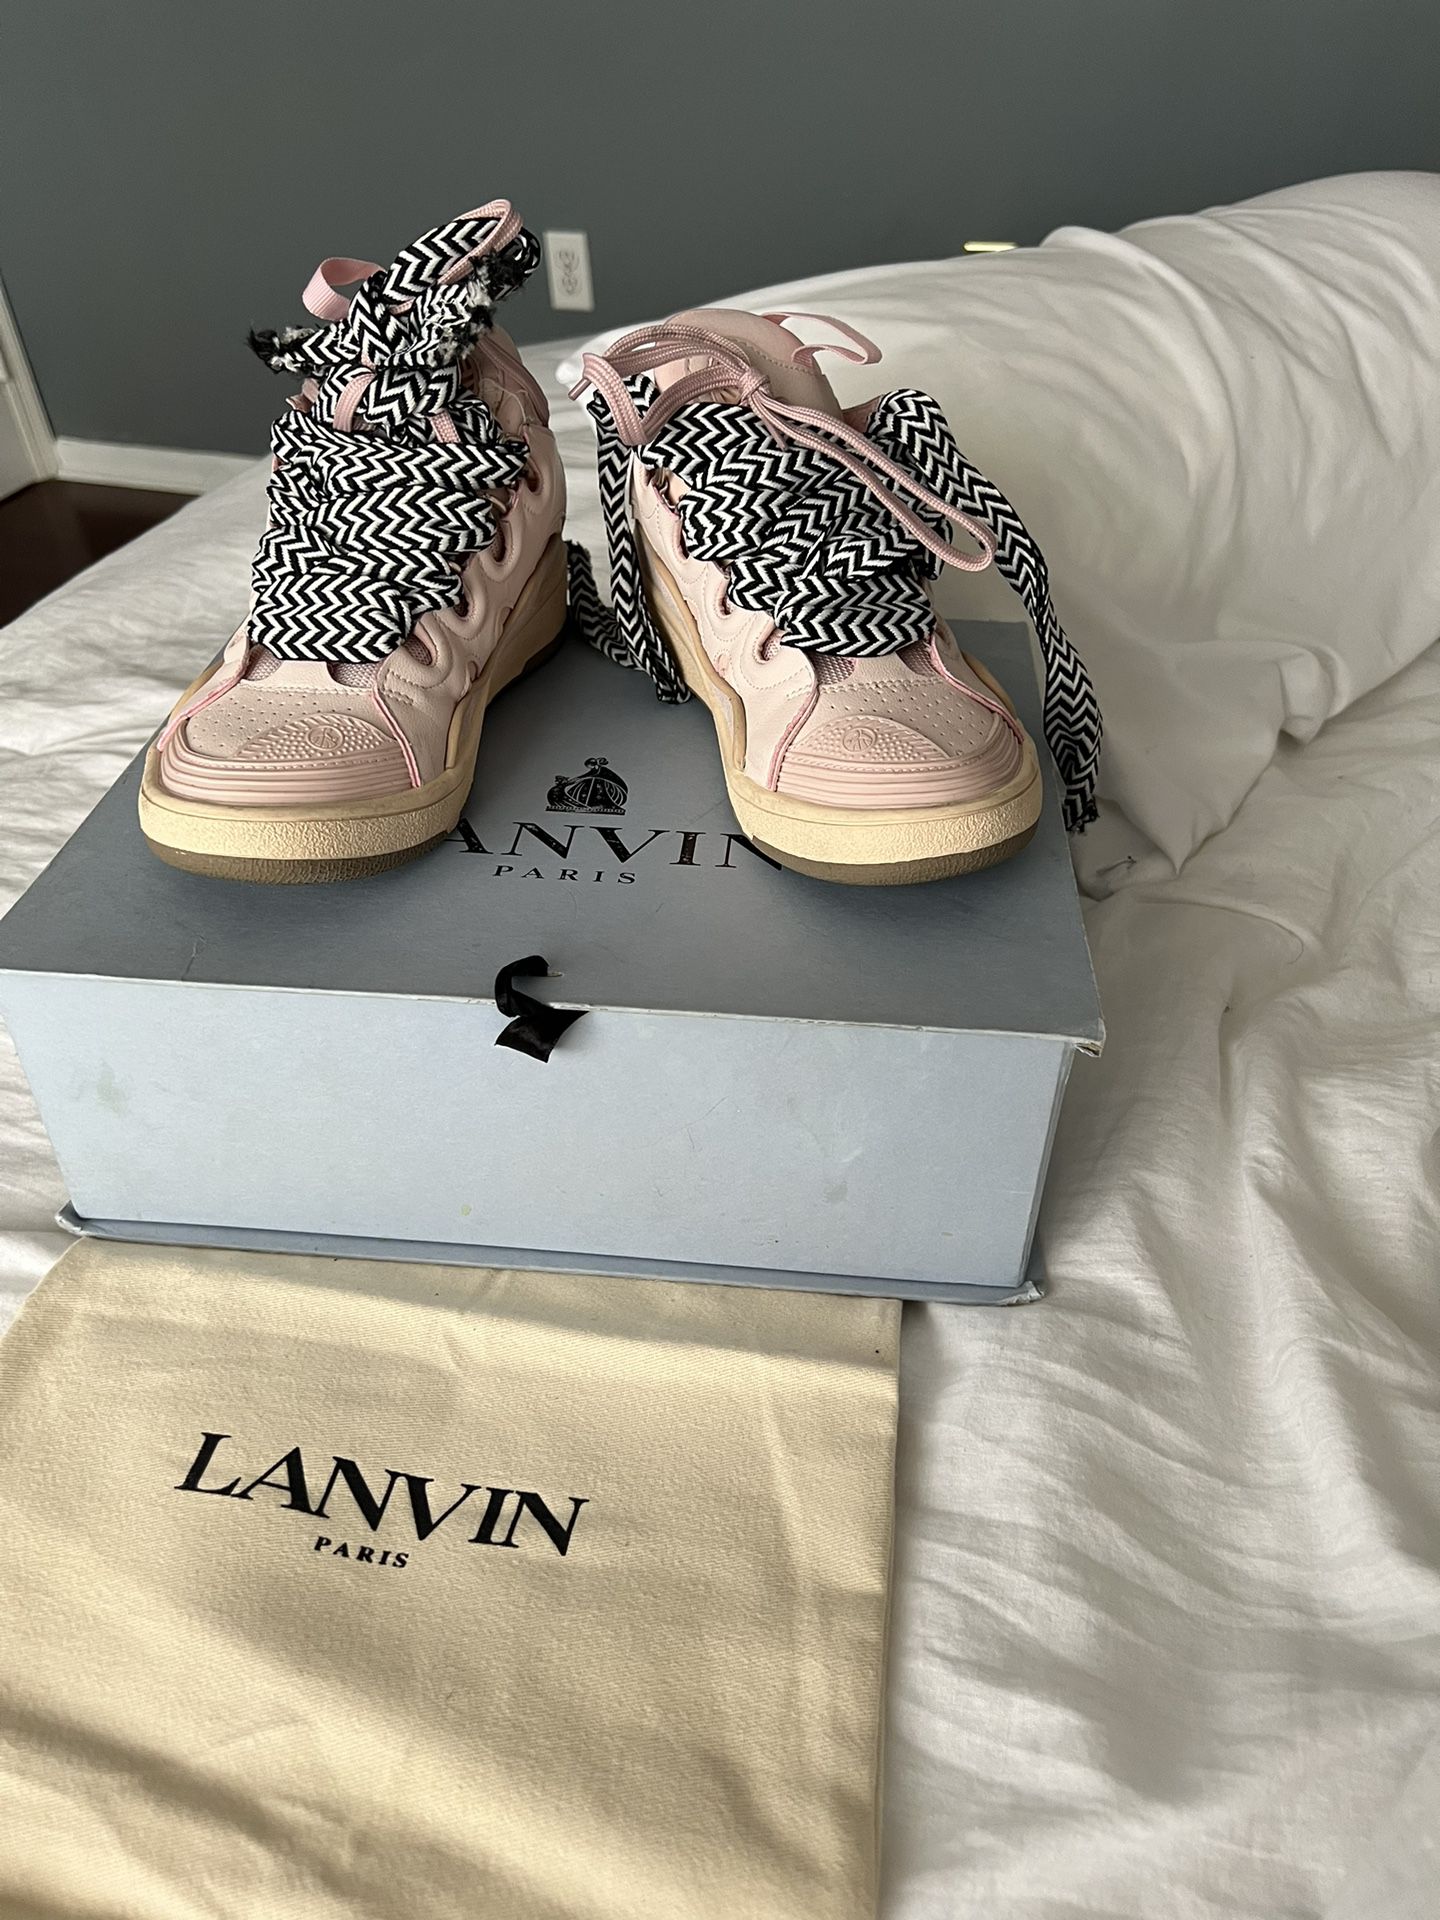 Lanvin chunky lace-up sneakers for Sale in Miramar, -